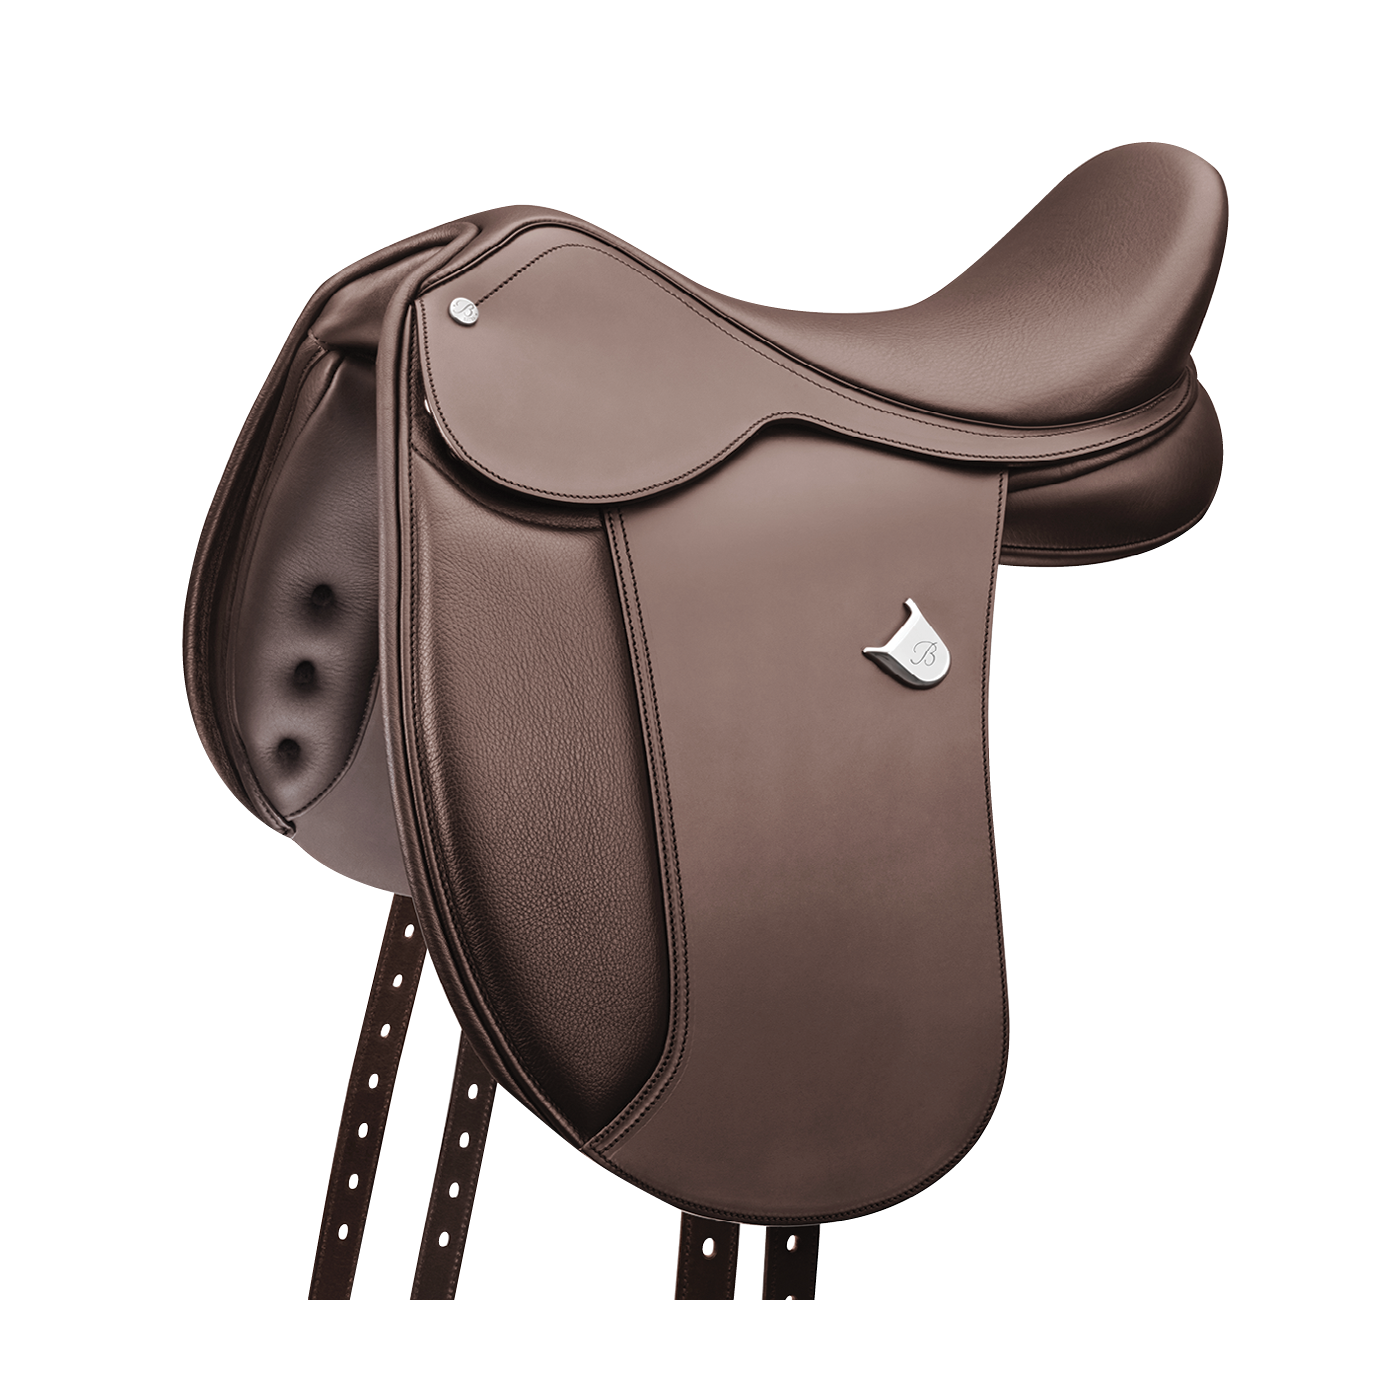 Bates Pony Dressage with long flap in Classic Brown Heritage Leather (DISPLAY MODEL)